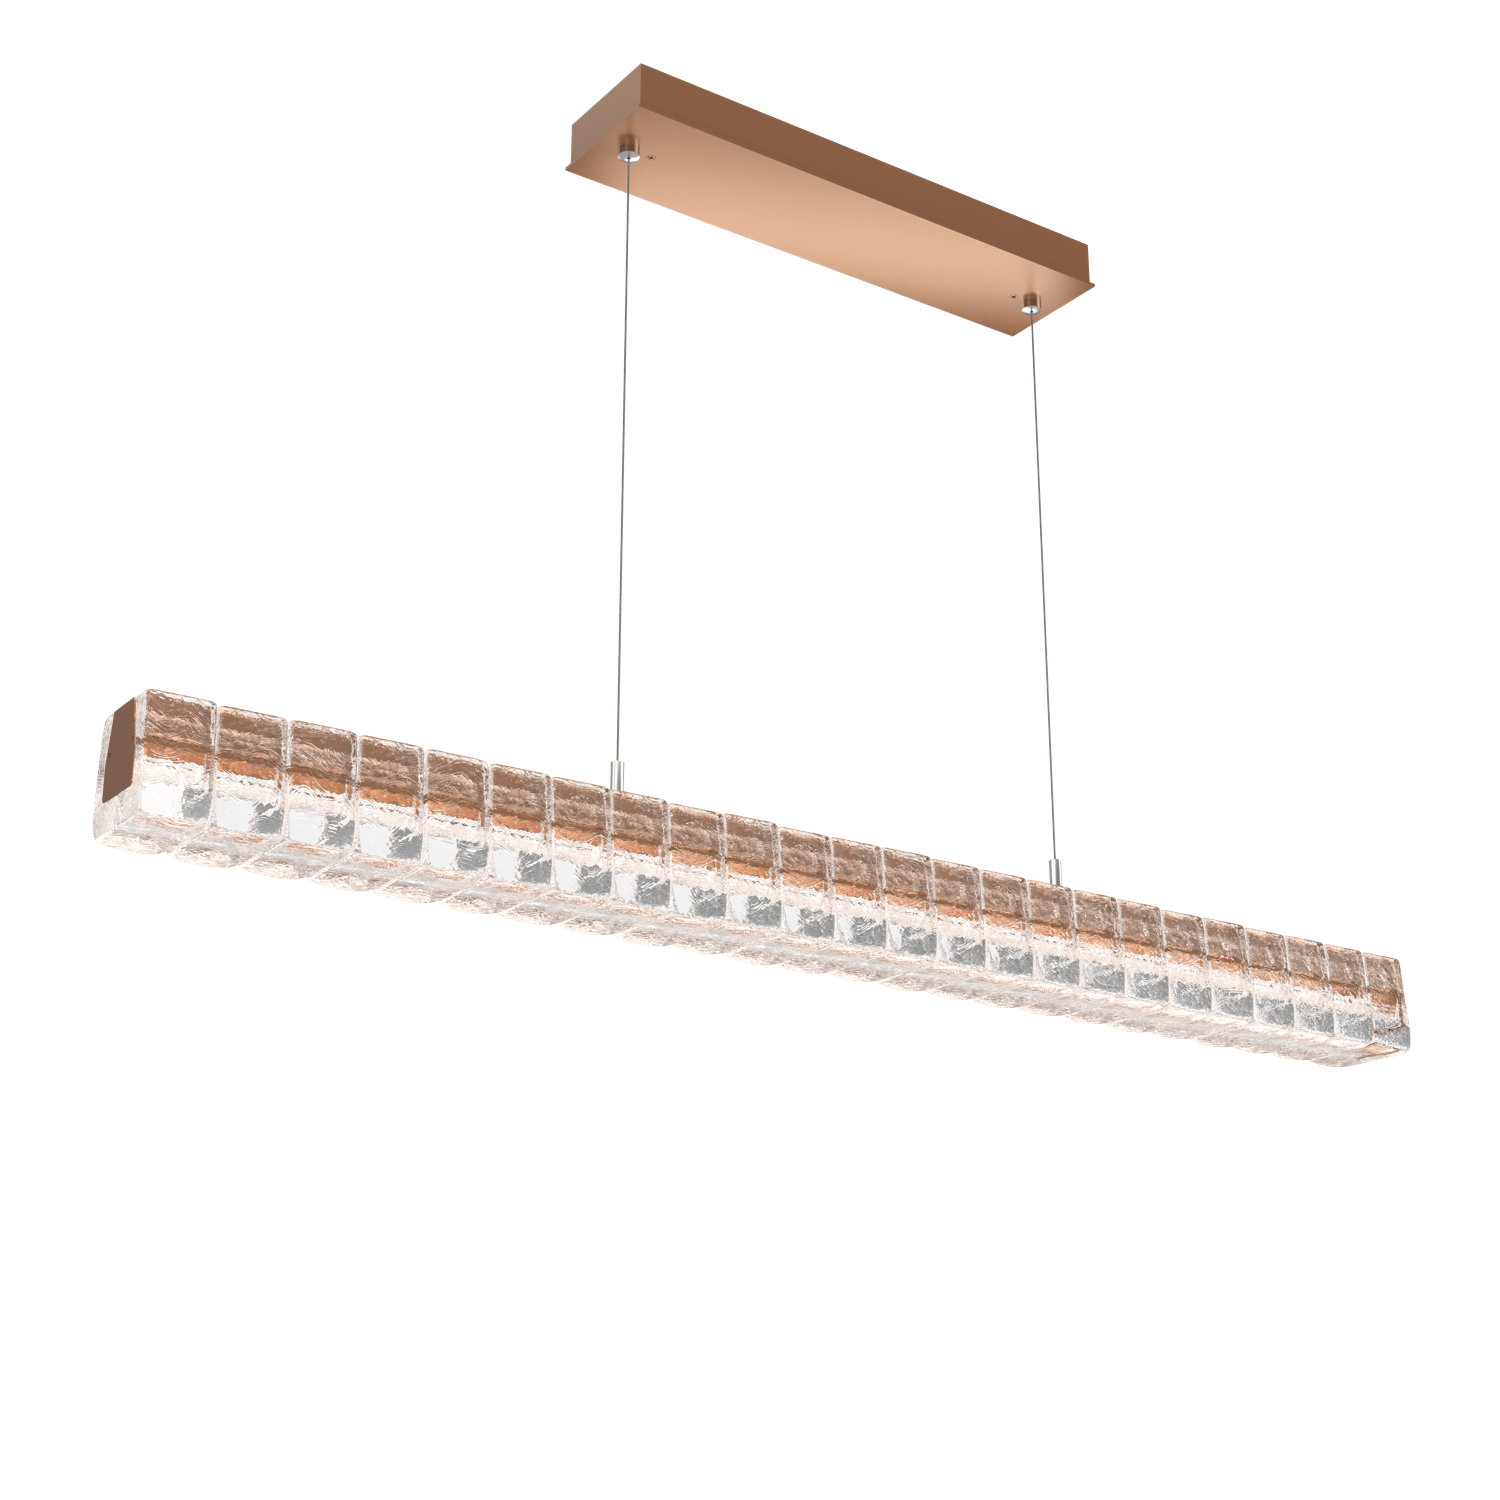 PLB0080-48-NB-Hammerton-Studio-Asscher-48-inch-linear-chandelier-with-novel-brass-finish-and-clear-cast-glass-shades-and-LED-lamping